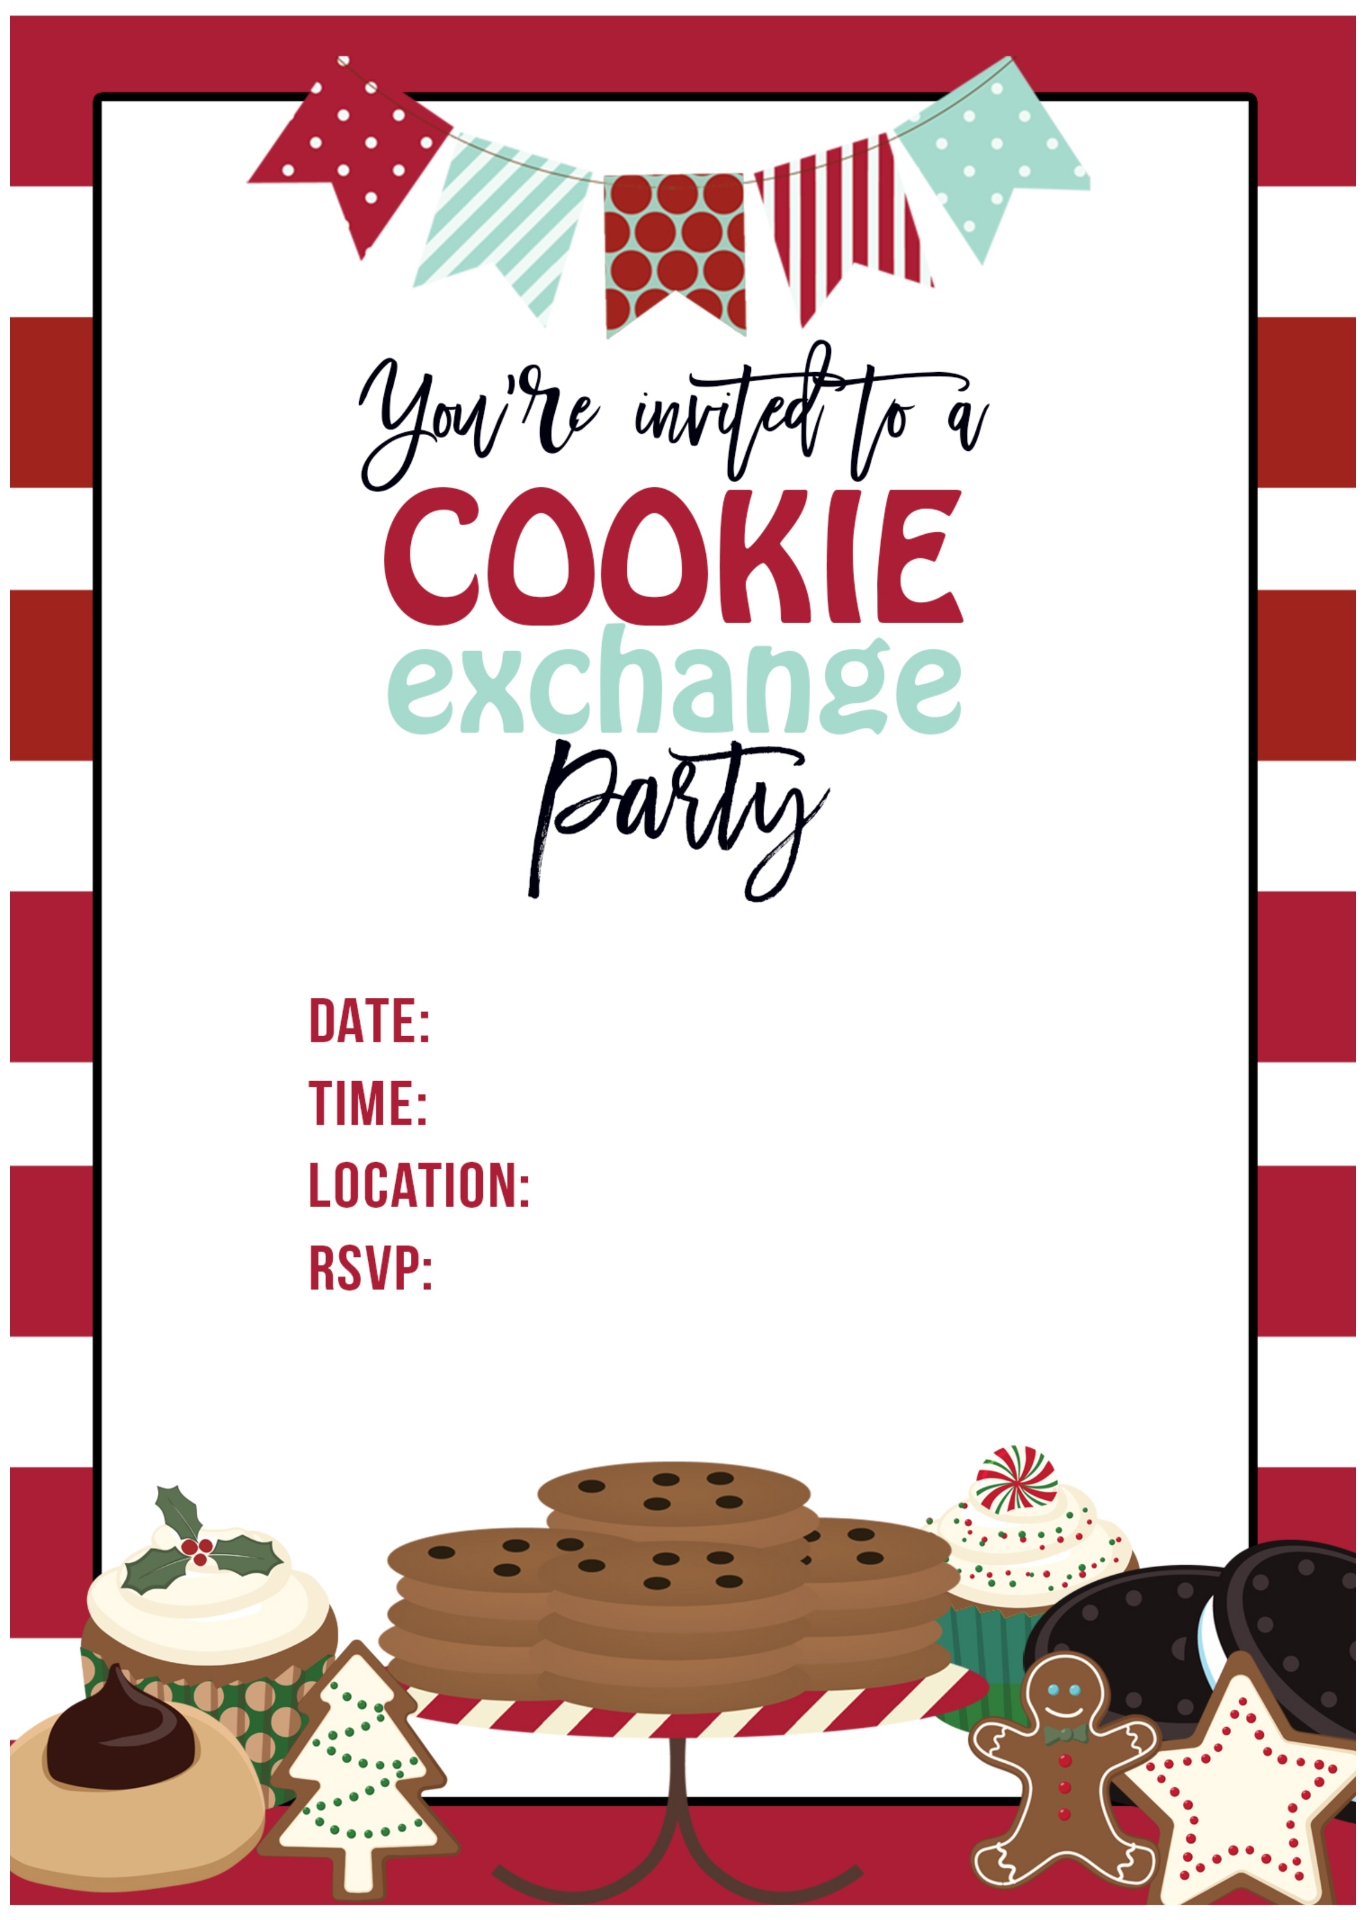 Cookie Exchange Rules Template